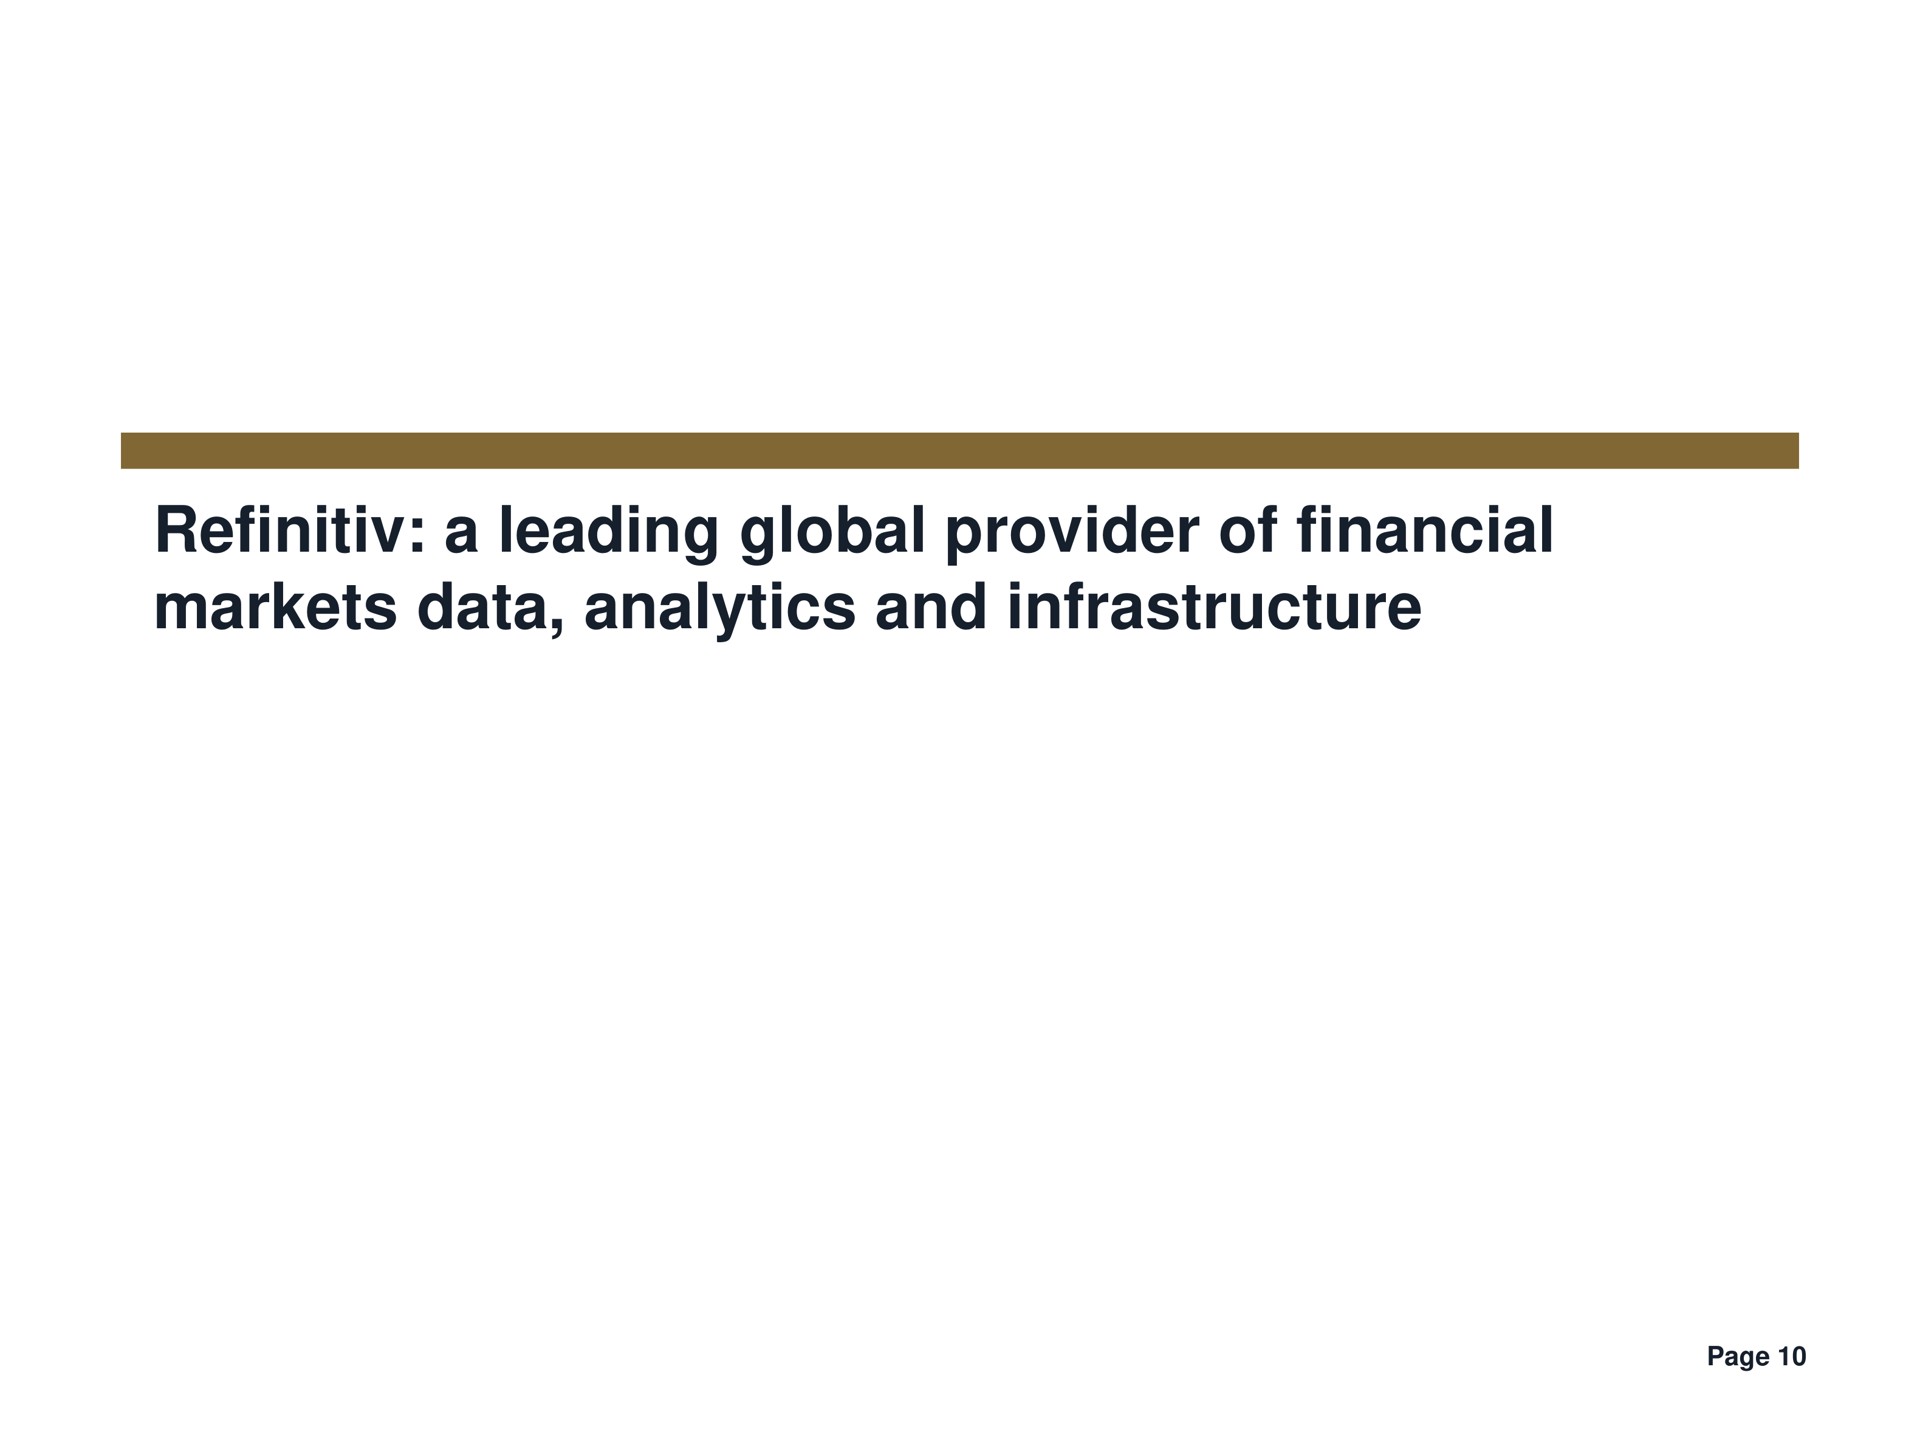 a leading global provider of financial markets data analytics and infrastructure | LSE